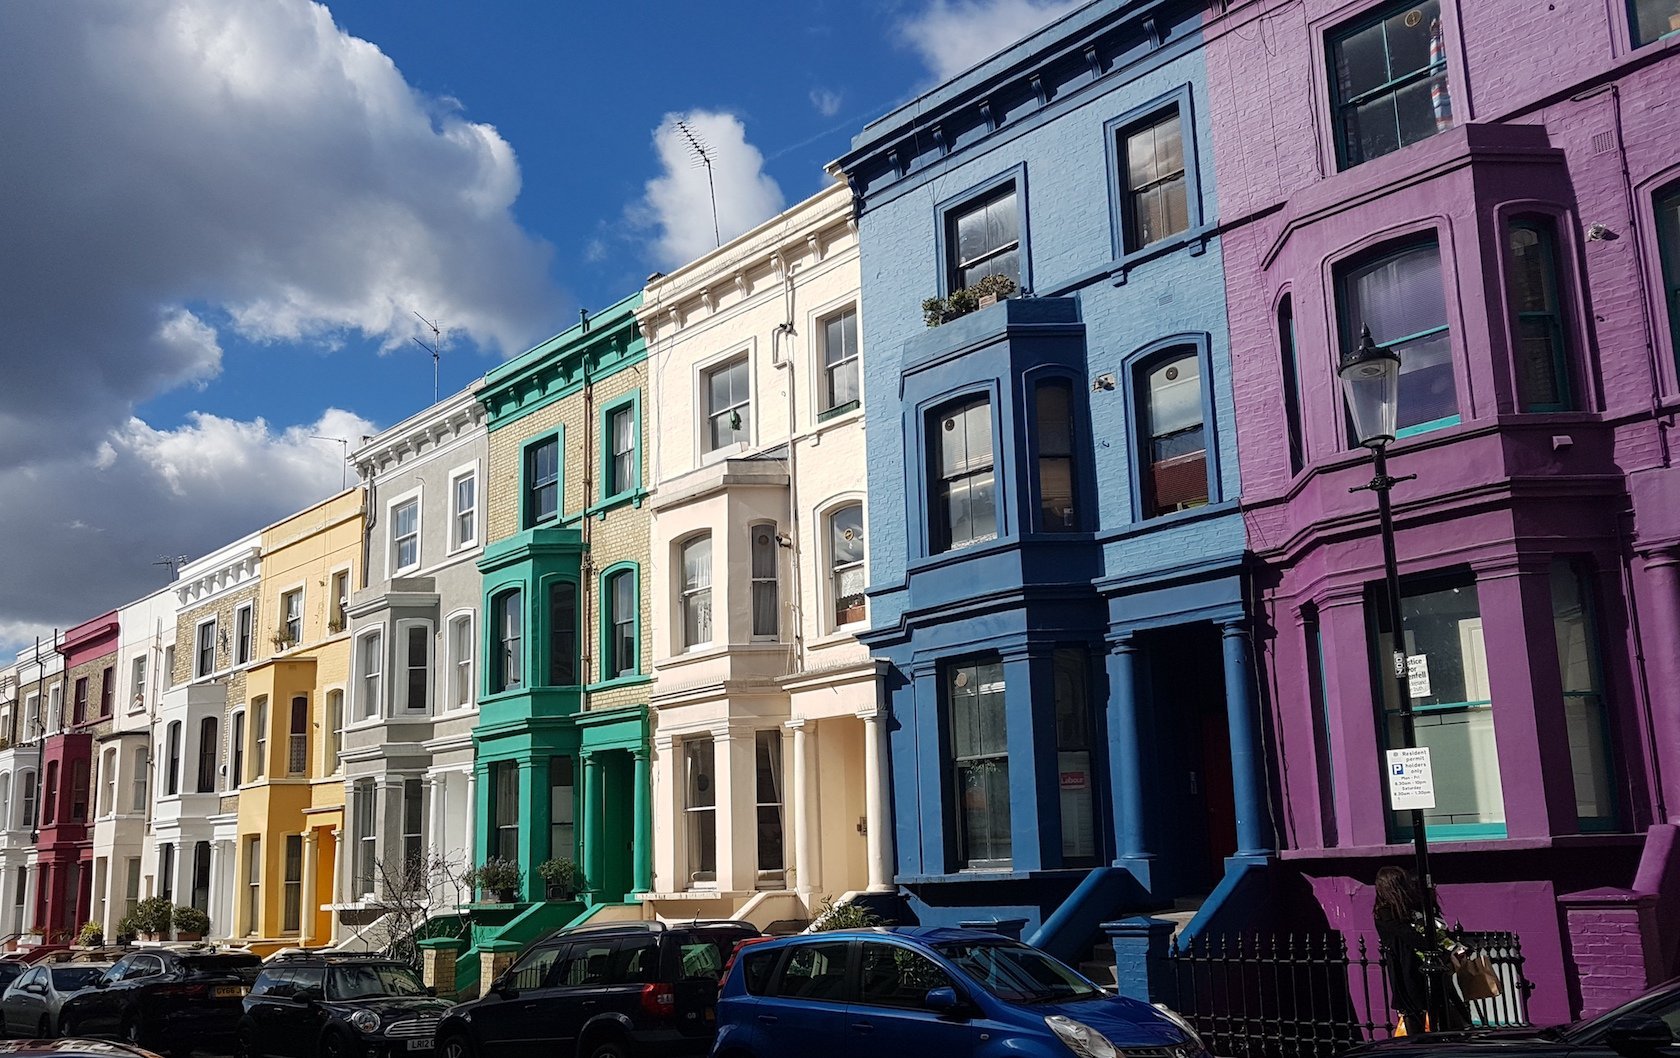 Notting Hill's Most Colorful Streets by London Perfect